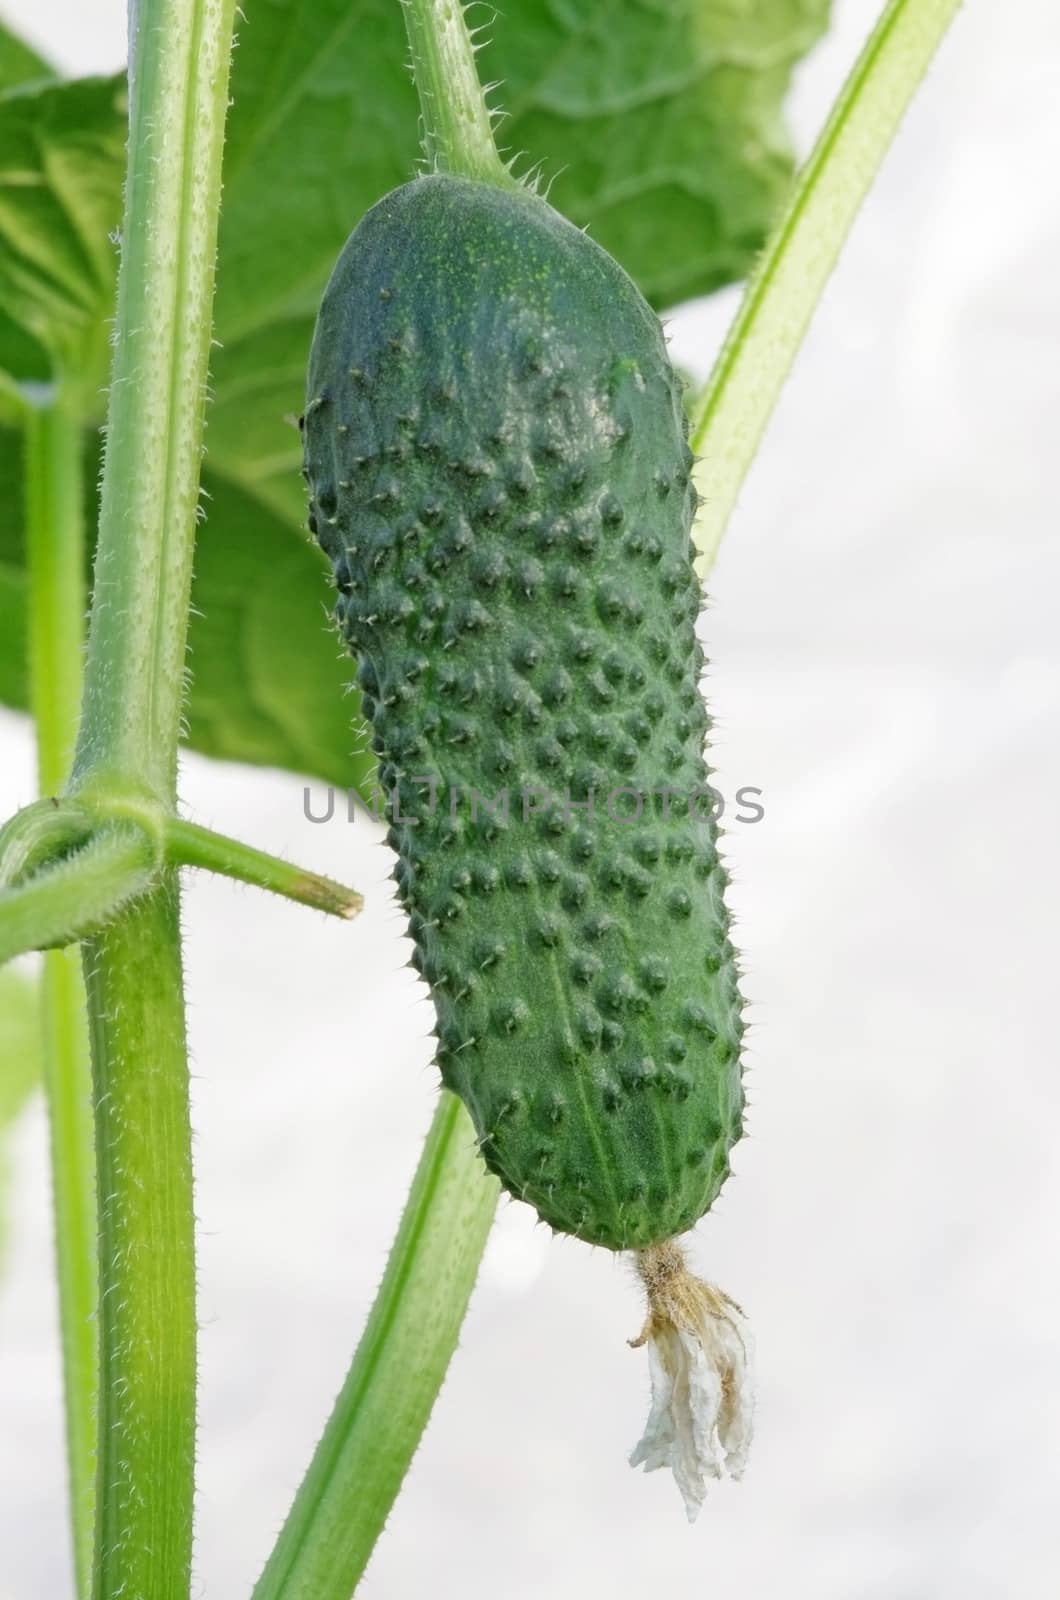 Small cucumber with plant over white